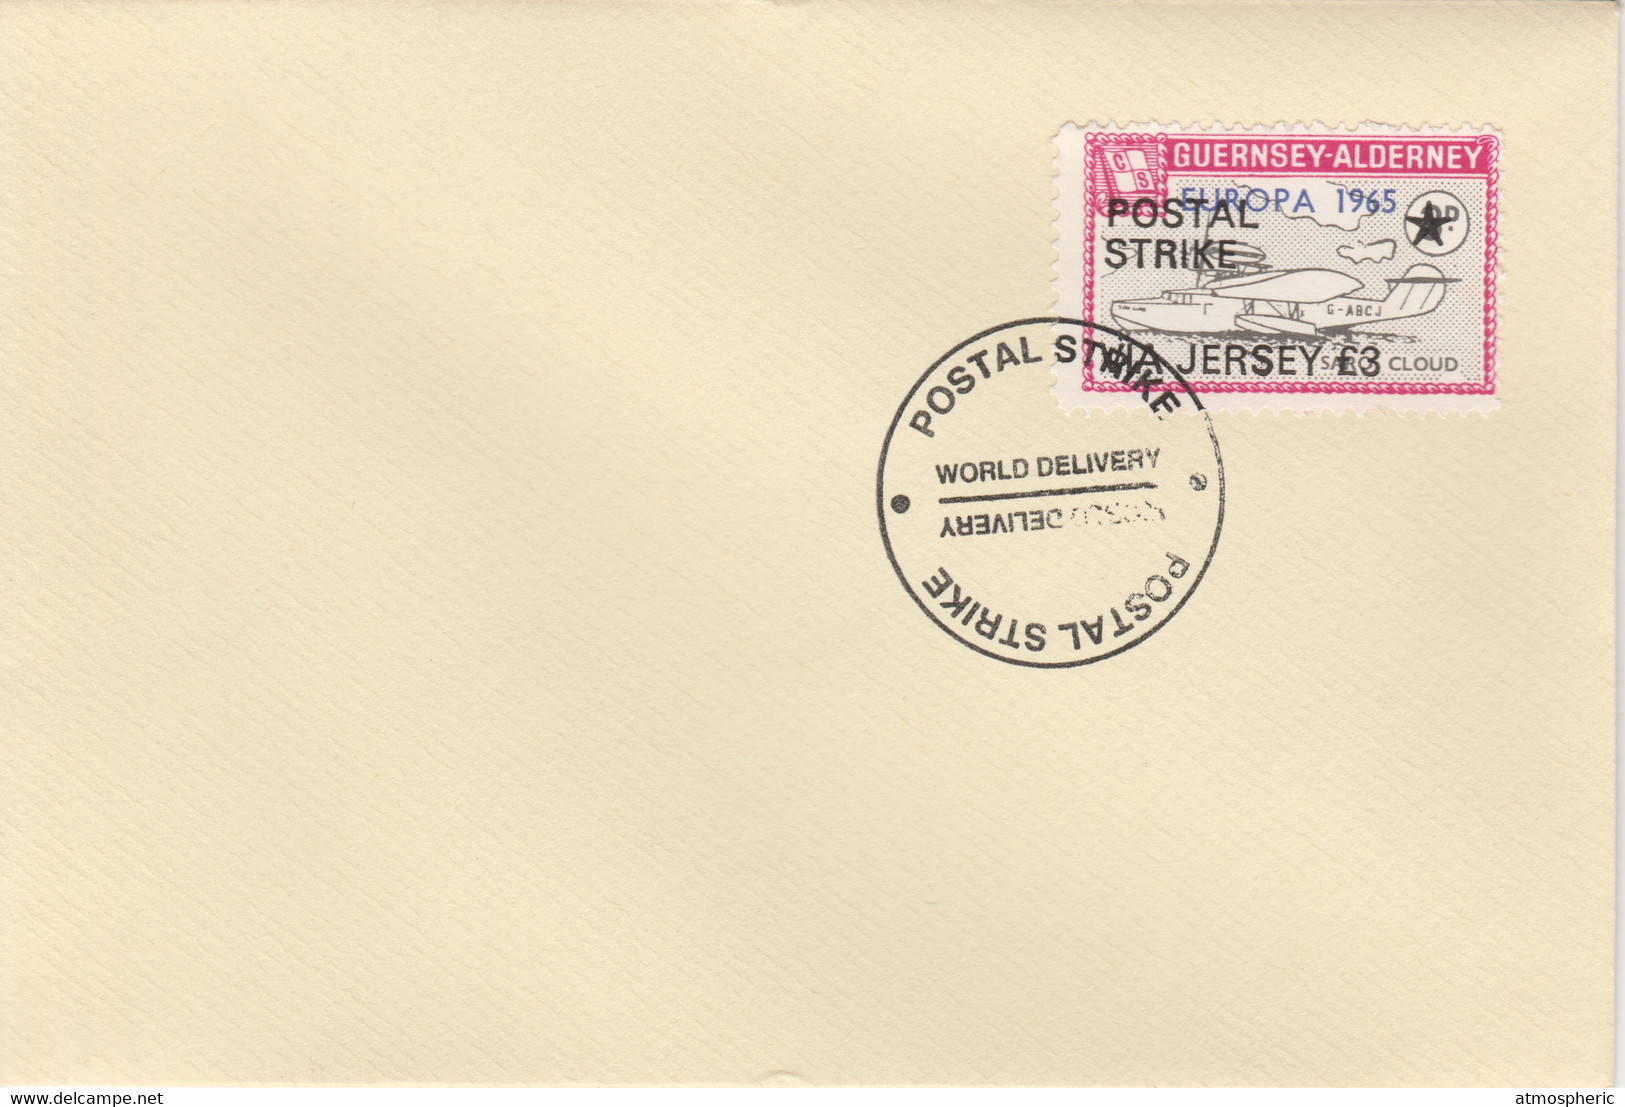 Guernsey - Alderney 1971 Postal Strike Cover To Jersey Bearing Flying Boat Saro Cloud 3d Overprinted Europa 1965 - Unclassified